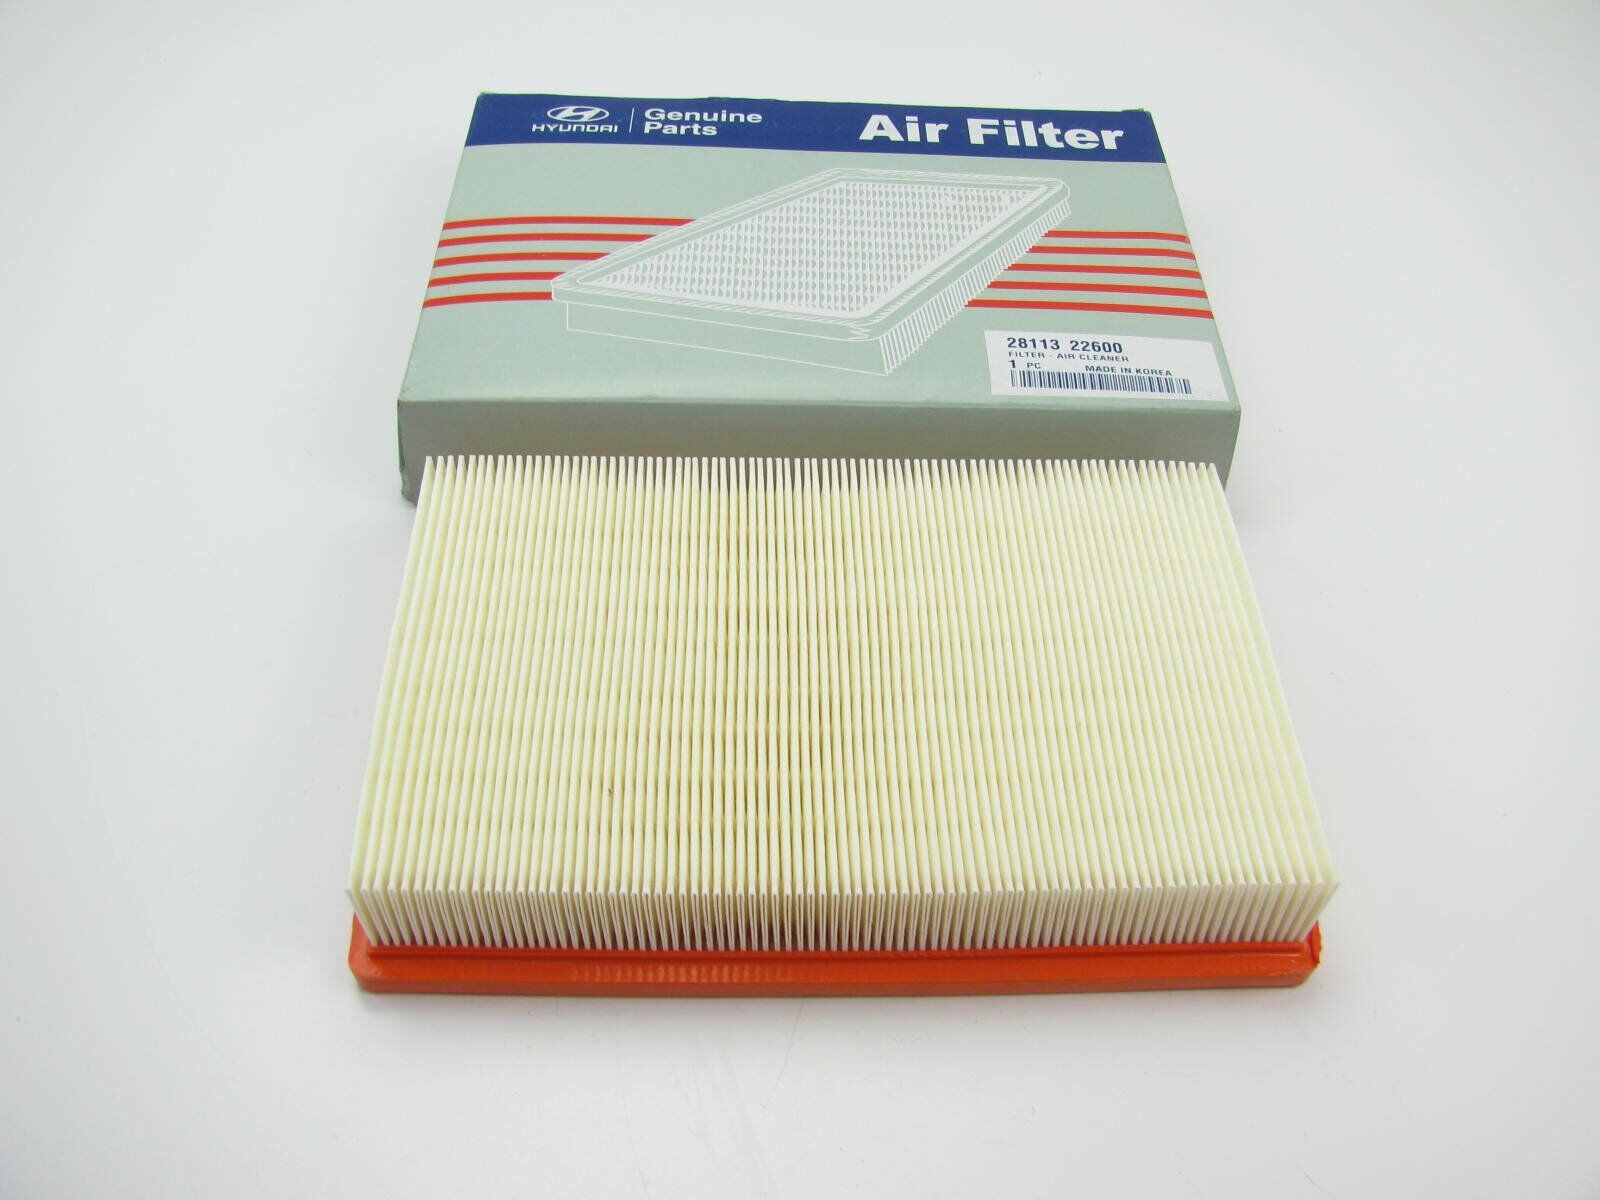 NEW GENUINE Engine Air Filter OEM For 2000-2005 Hyundai Accent 2811322600